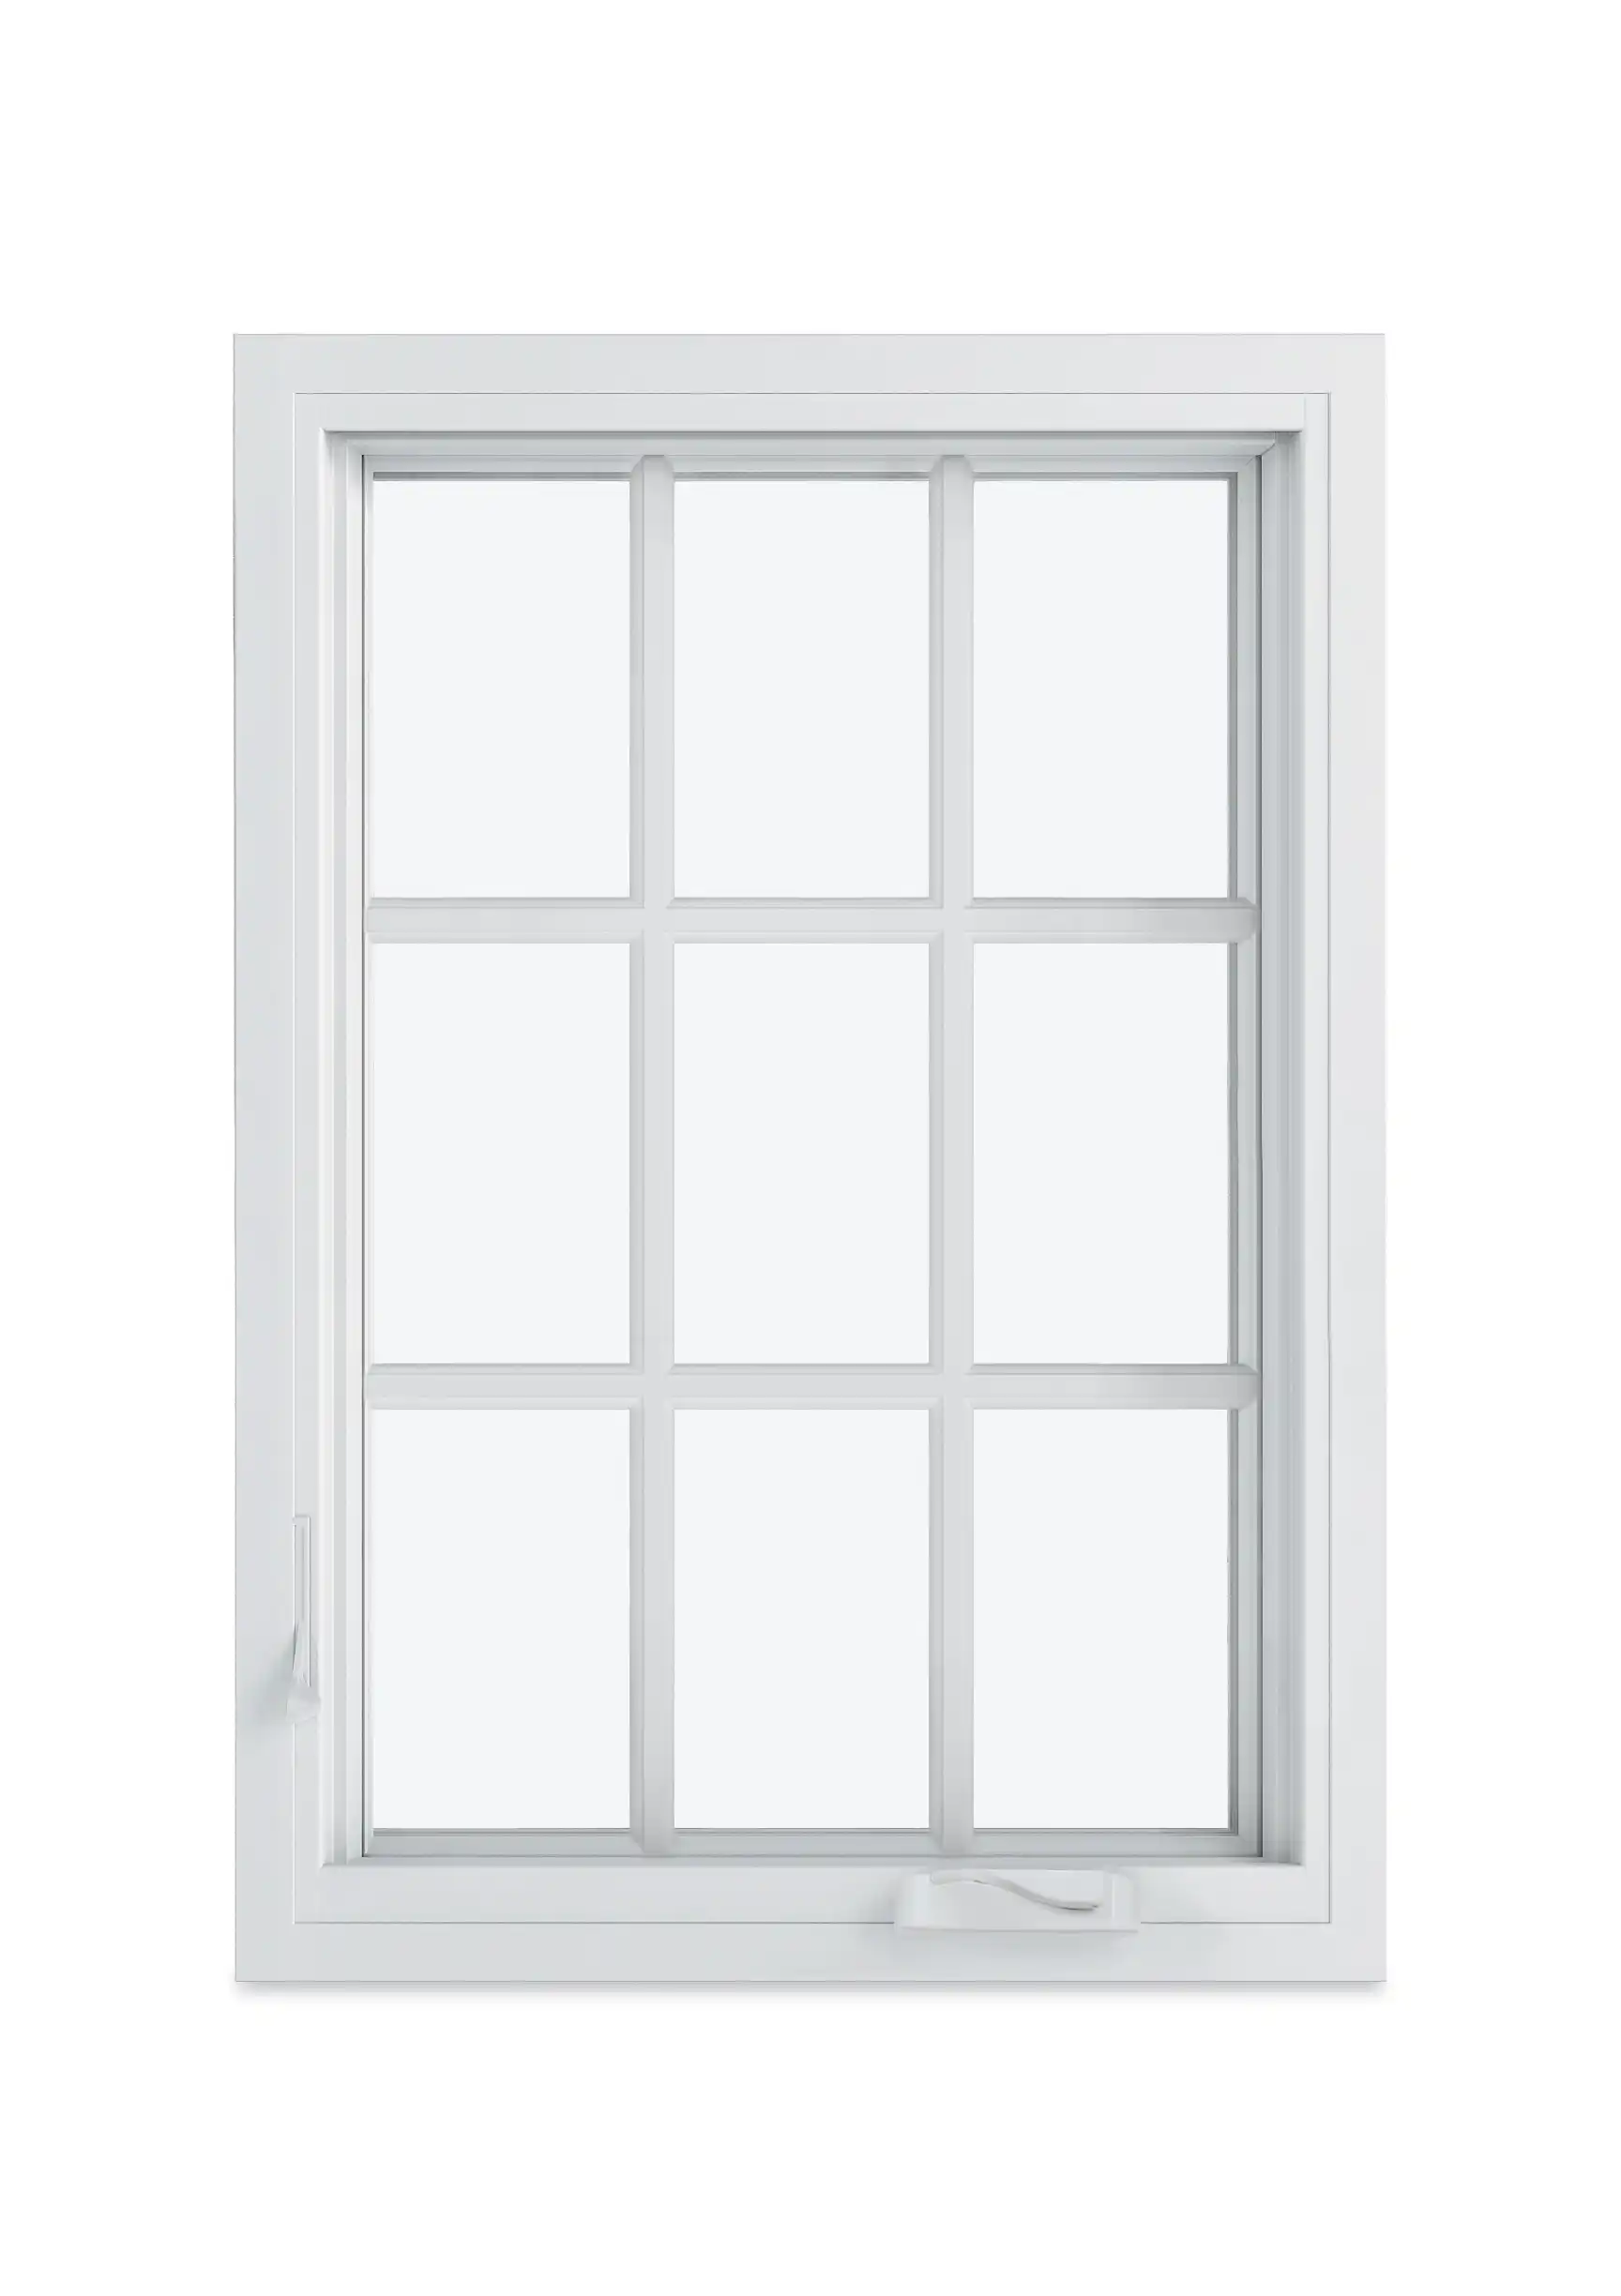 A white Marvin Replacement Casement window with a standard rectangular divided lite pattern.